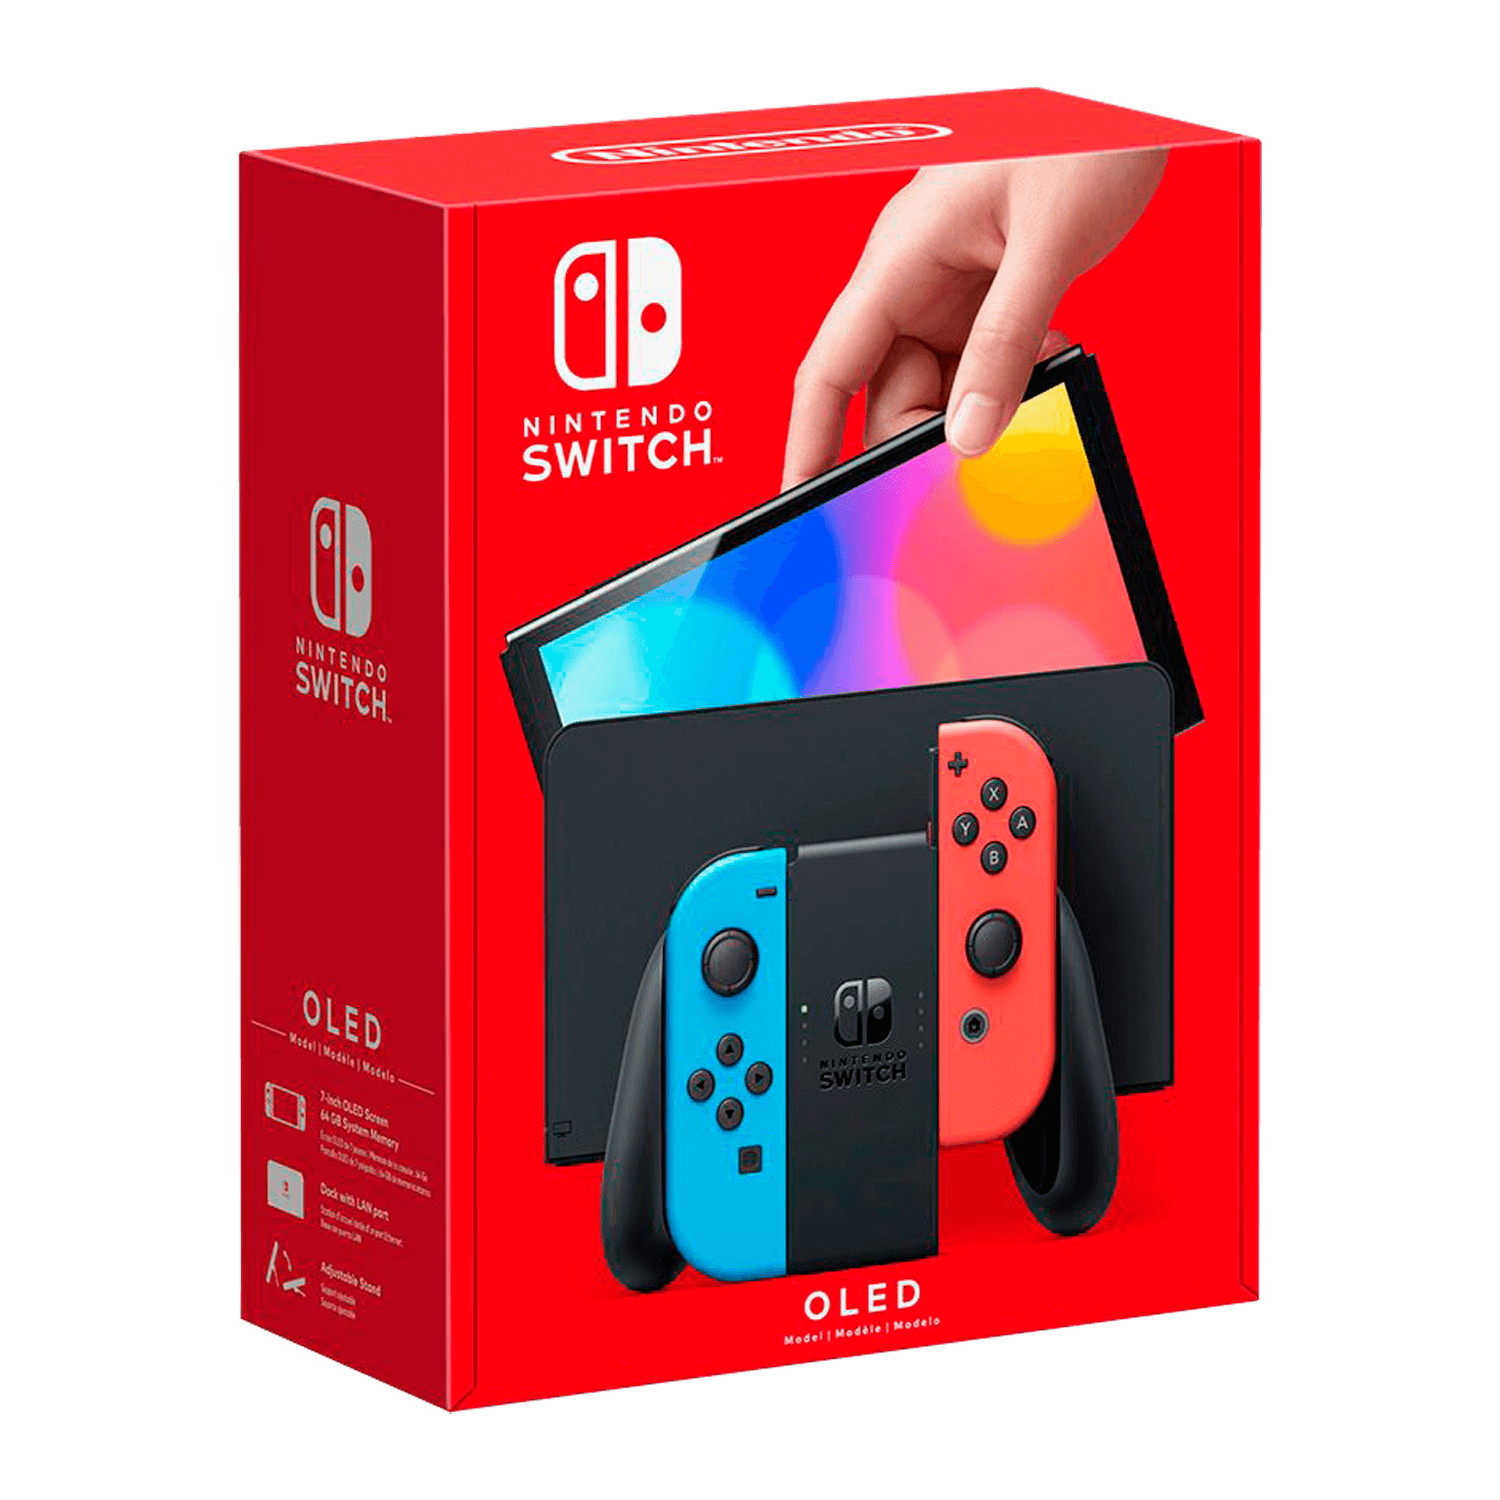 Console Nintendo Switch OLED 64GB Japão- Neon (HEG-S-KABAA)